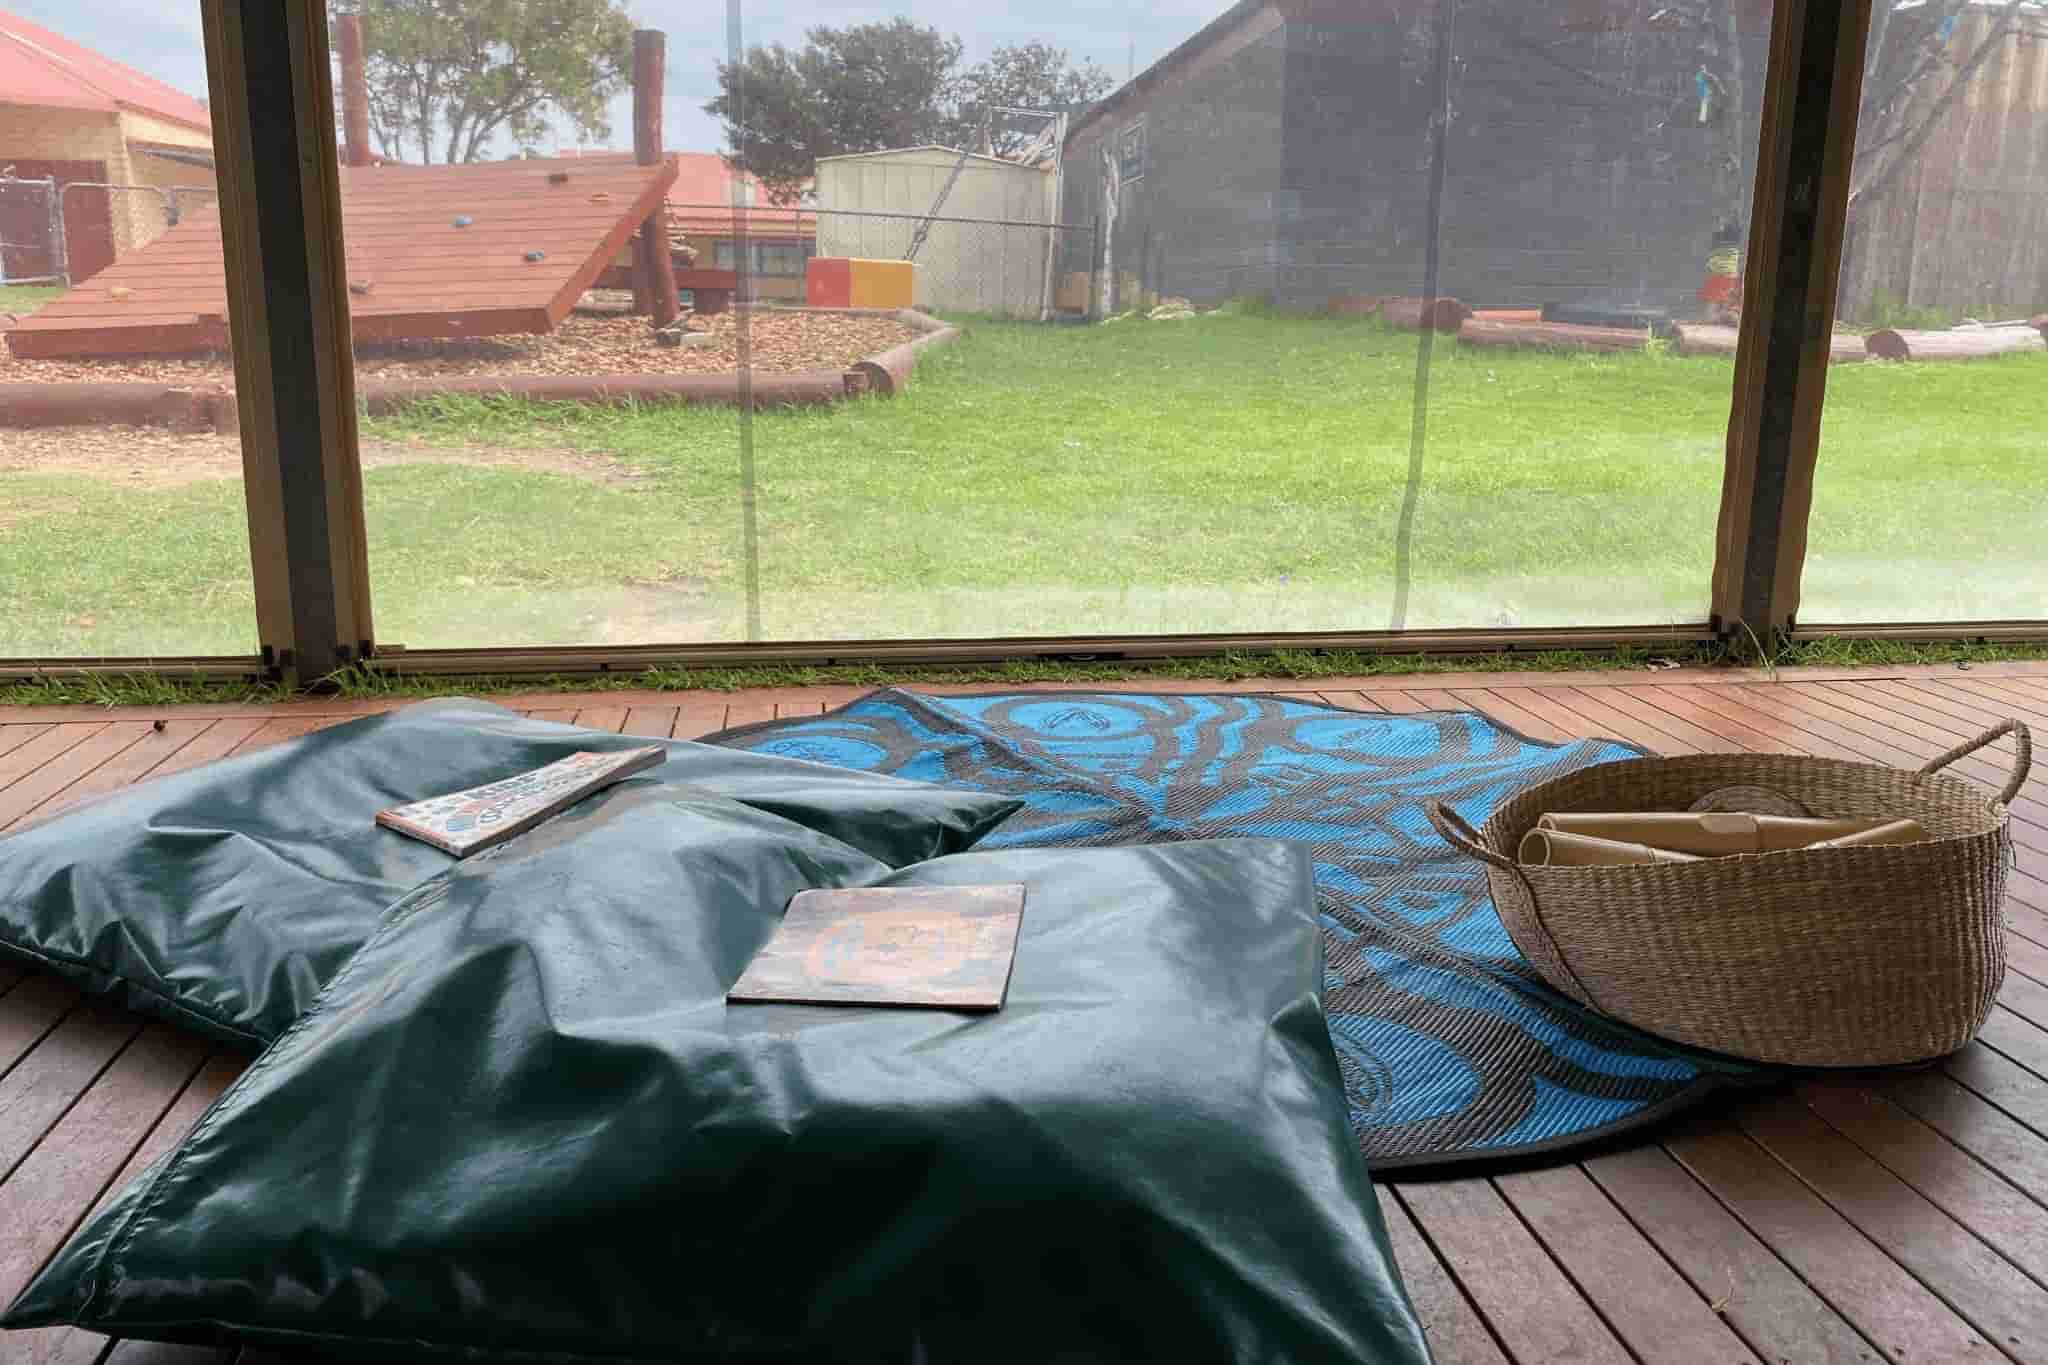 floor seating area with cushions looking outside window to playground